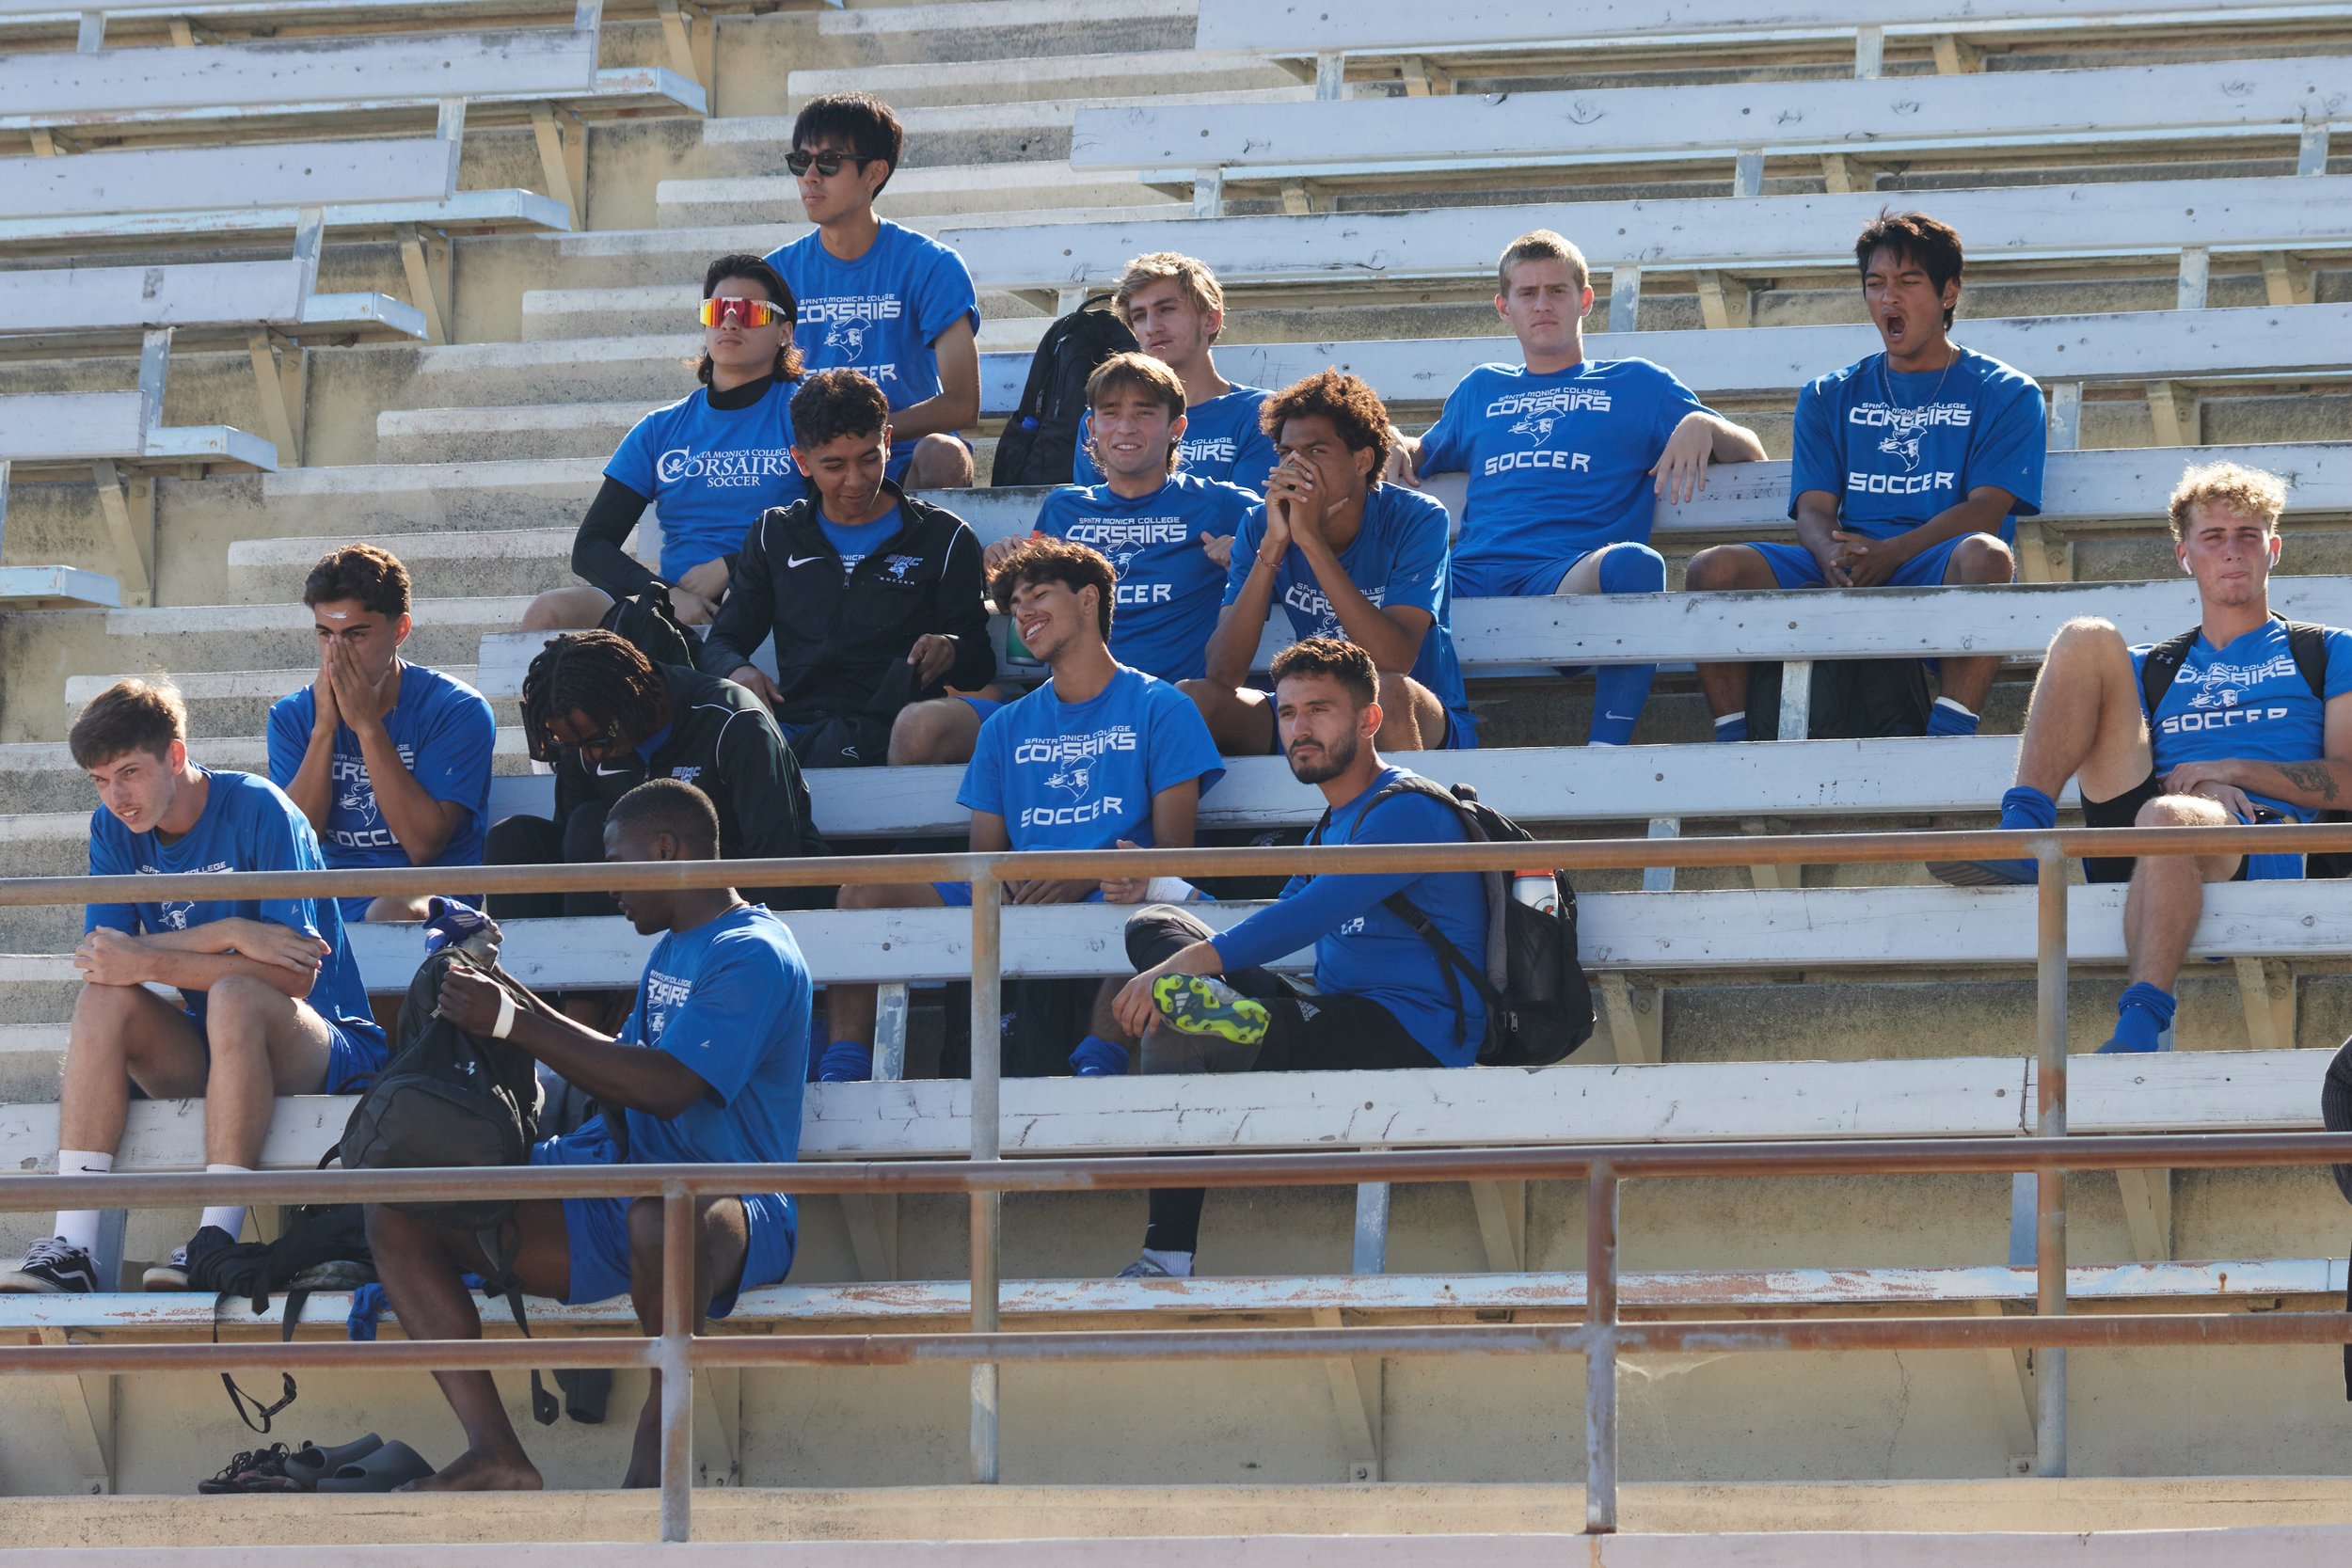  Santa Monica College Corsairs men's soccer team watches the women's soccer match against Citrus College Owls from the bleachers at Corsair Field, Santa Monica, Calif., on Oct 13, 2023. They are to also have their own match after the women's match is